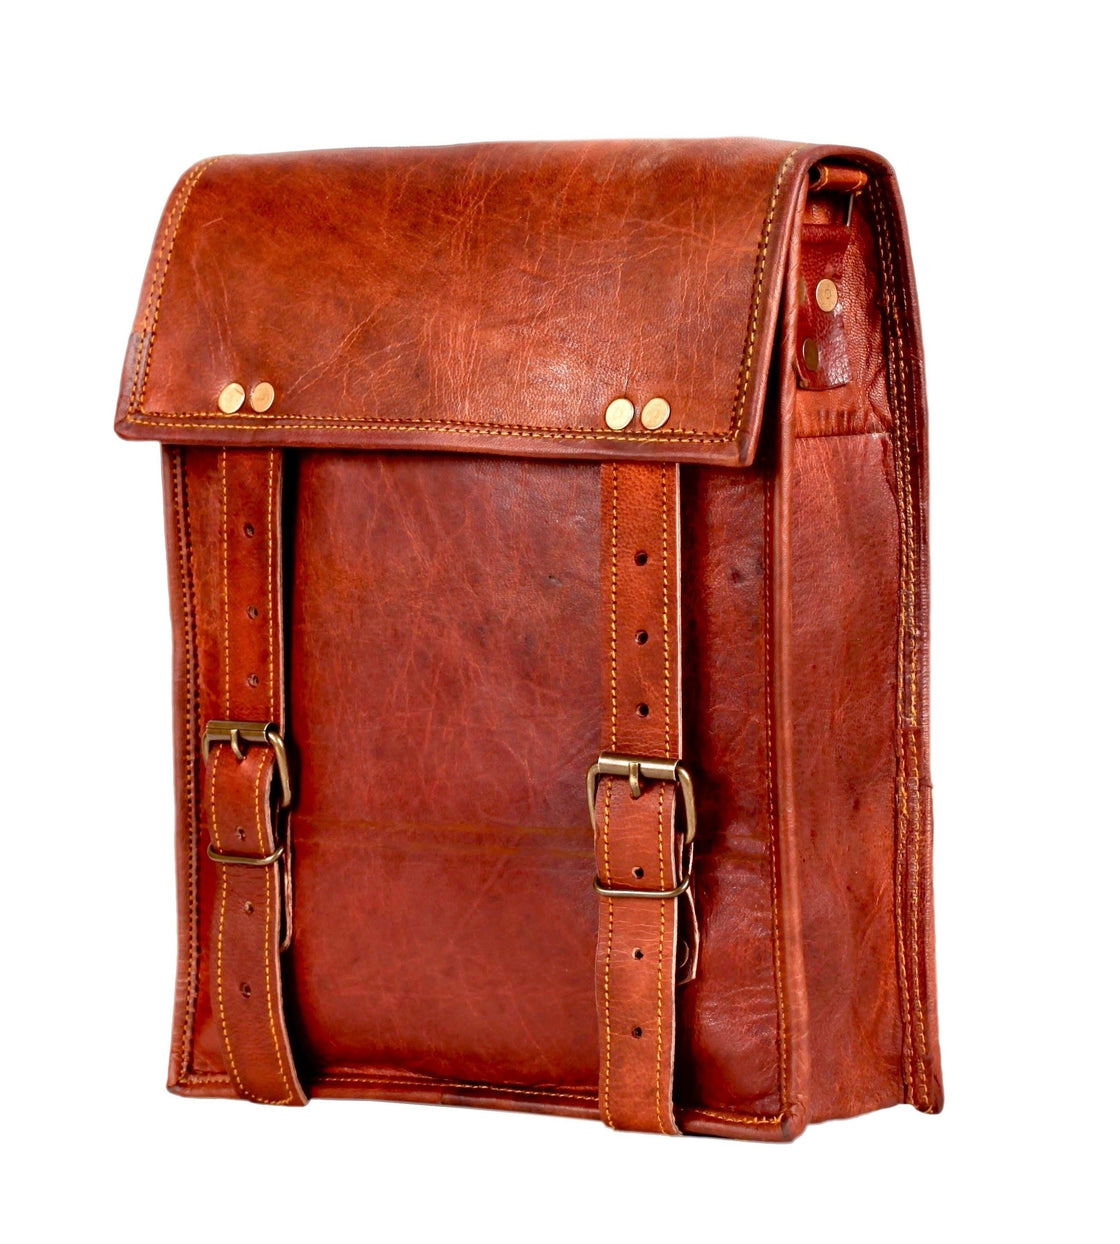 Buy Laptop Sleeves, Bags & iPad Cases at Modern Quests